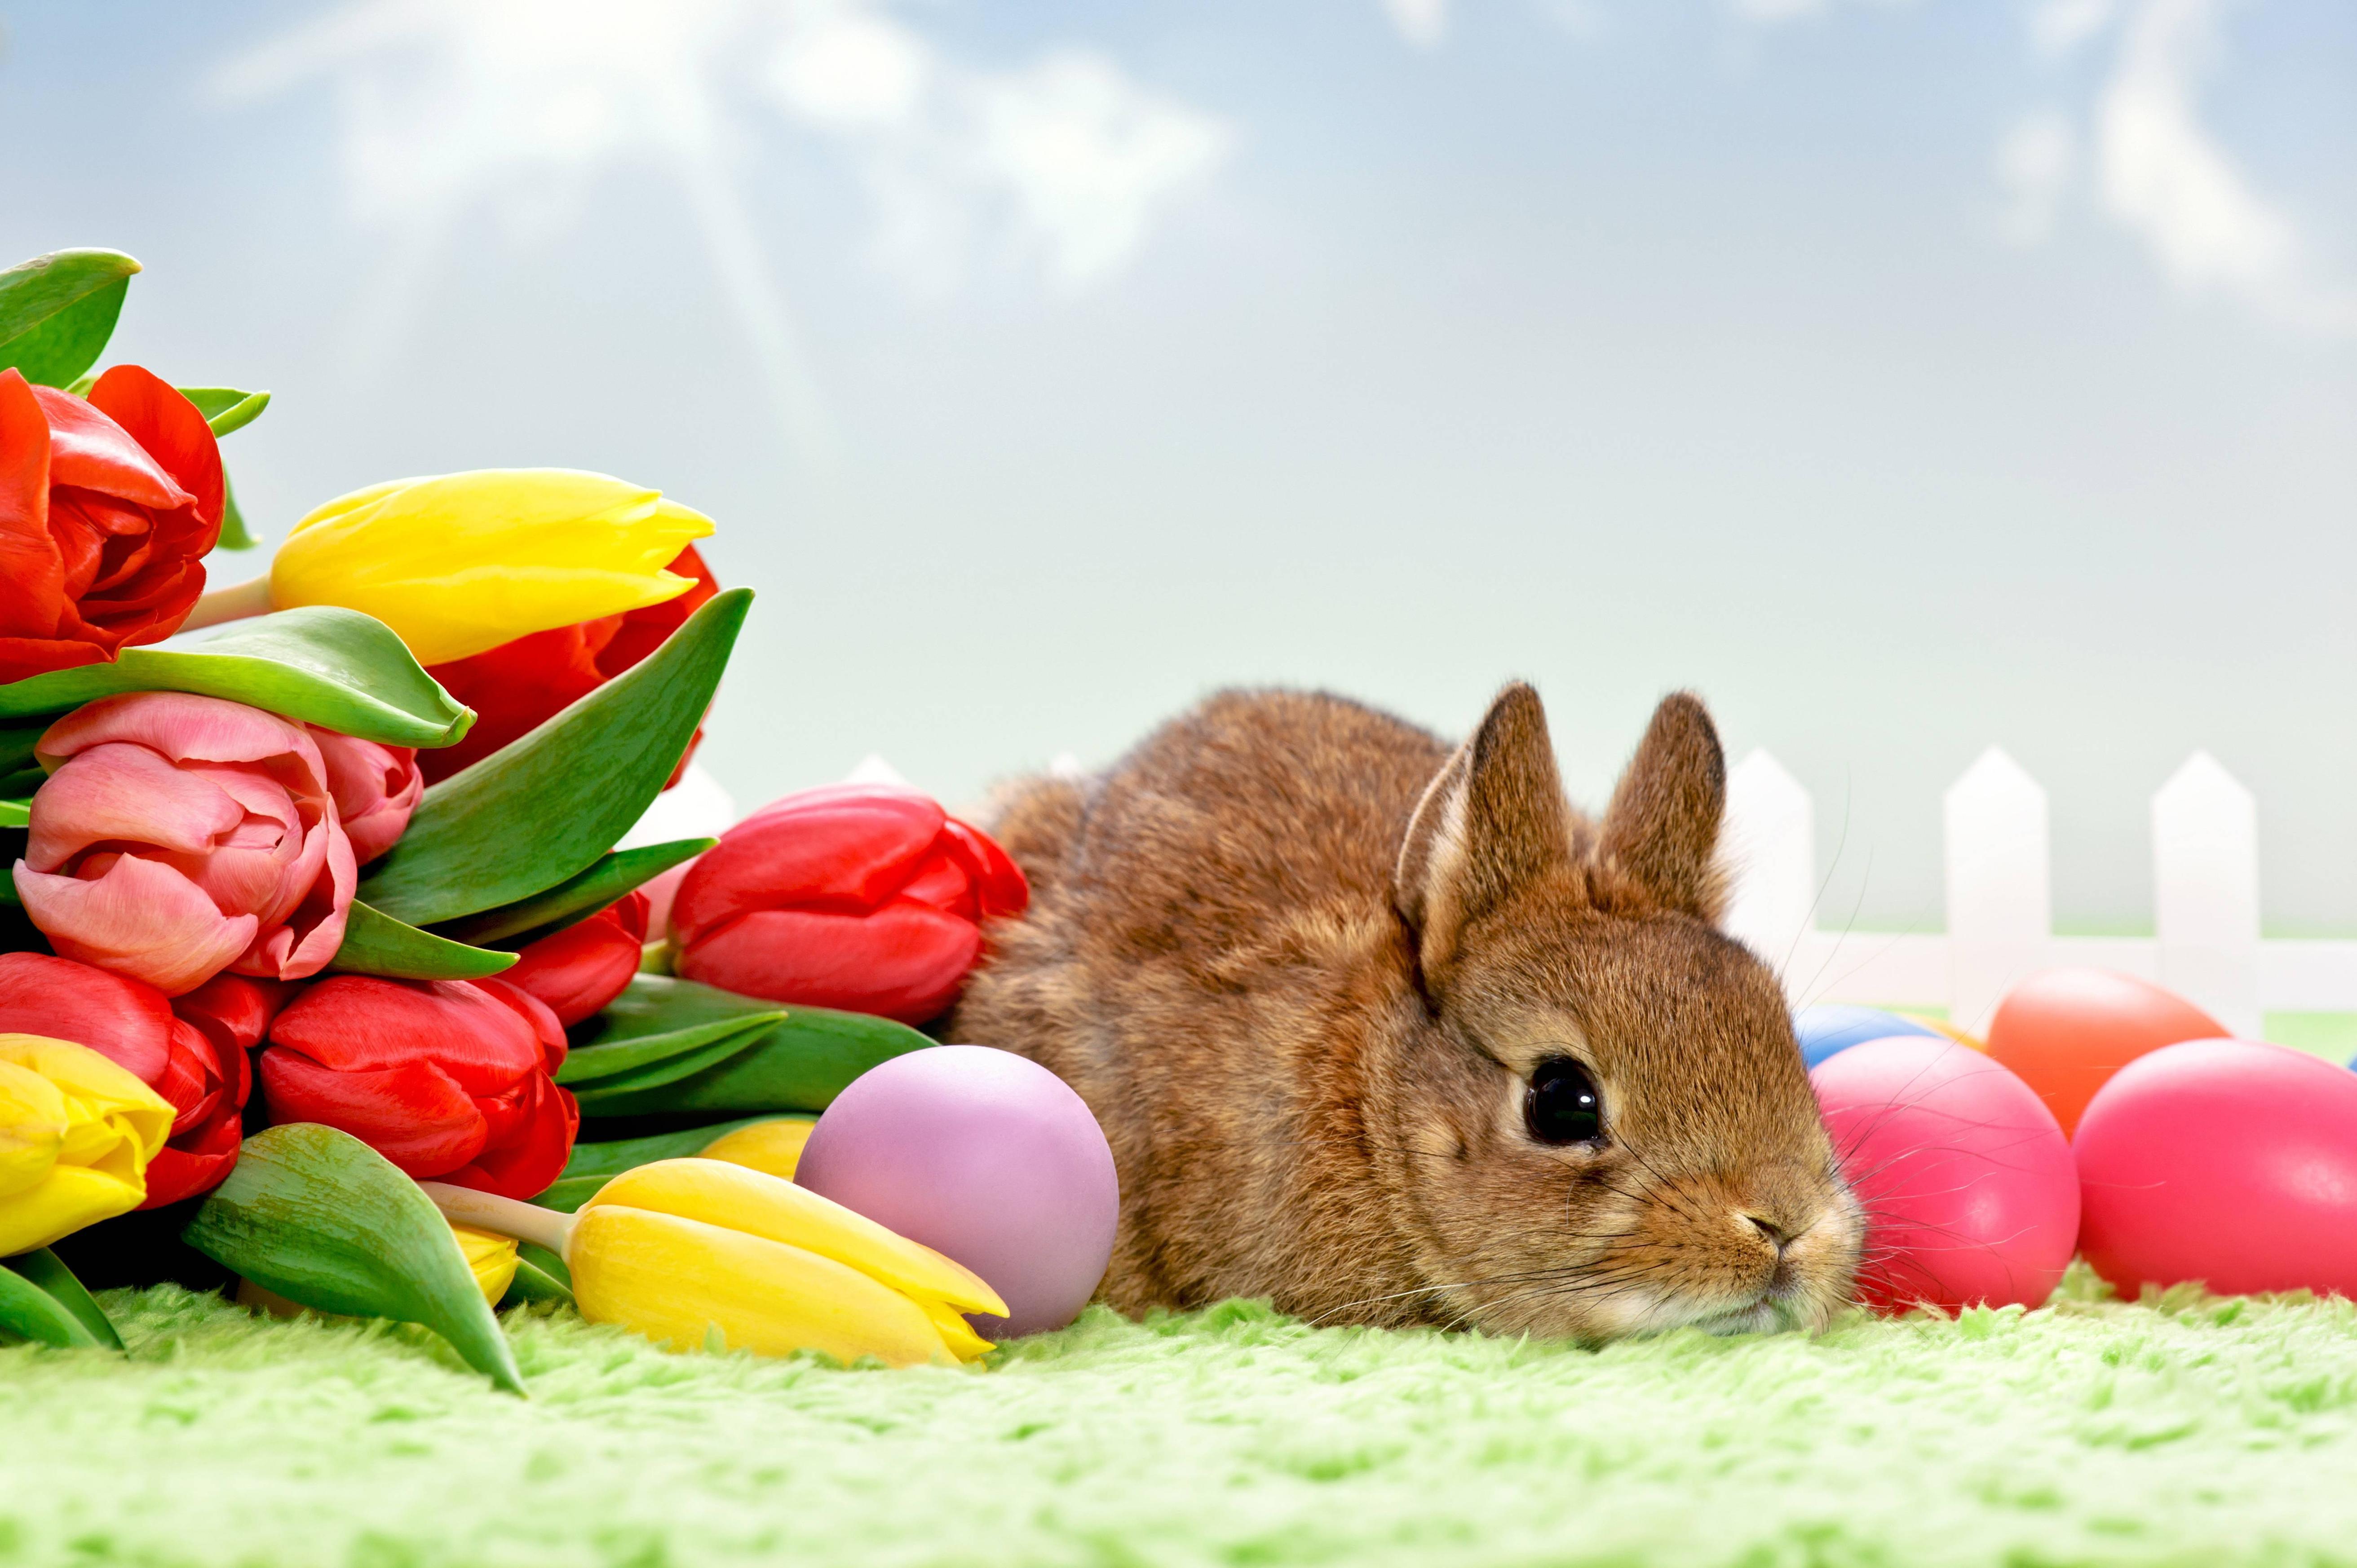 Tulips and Easter bunny wallpaper and image